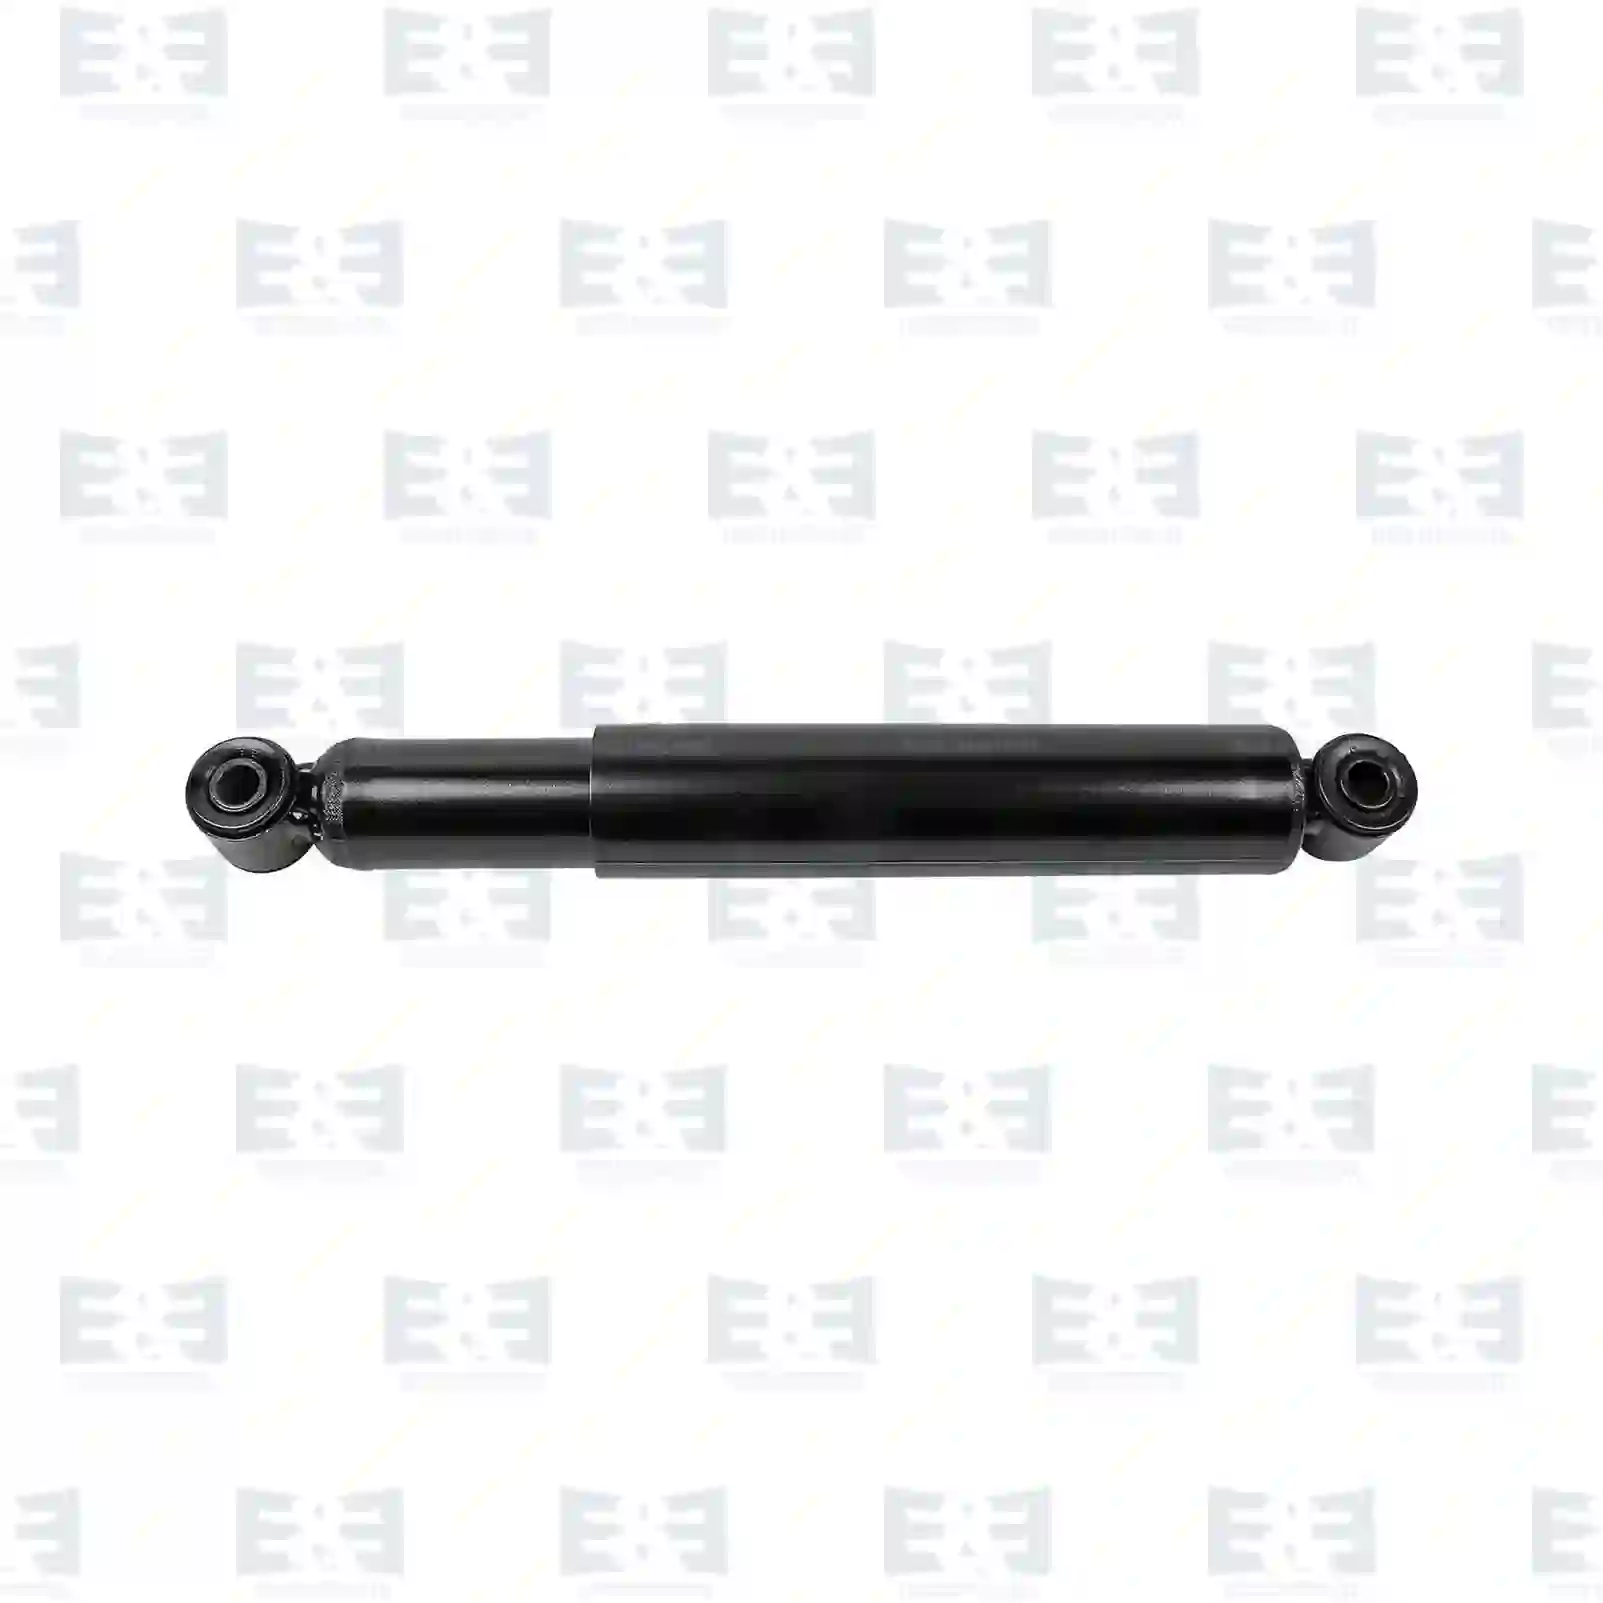 Shock Absorber Shock absorber, EE No 2E2281751 ,  oem no:98408702, 98411158, 99451728, 02997267, 504063456, 98408702, 98411158, 98498971, 99451728, 98408702, 98411158, 99451728 E&E Truck Spare Parts | Truck Spare Parts, Auotomotive Spare Parts